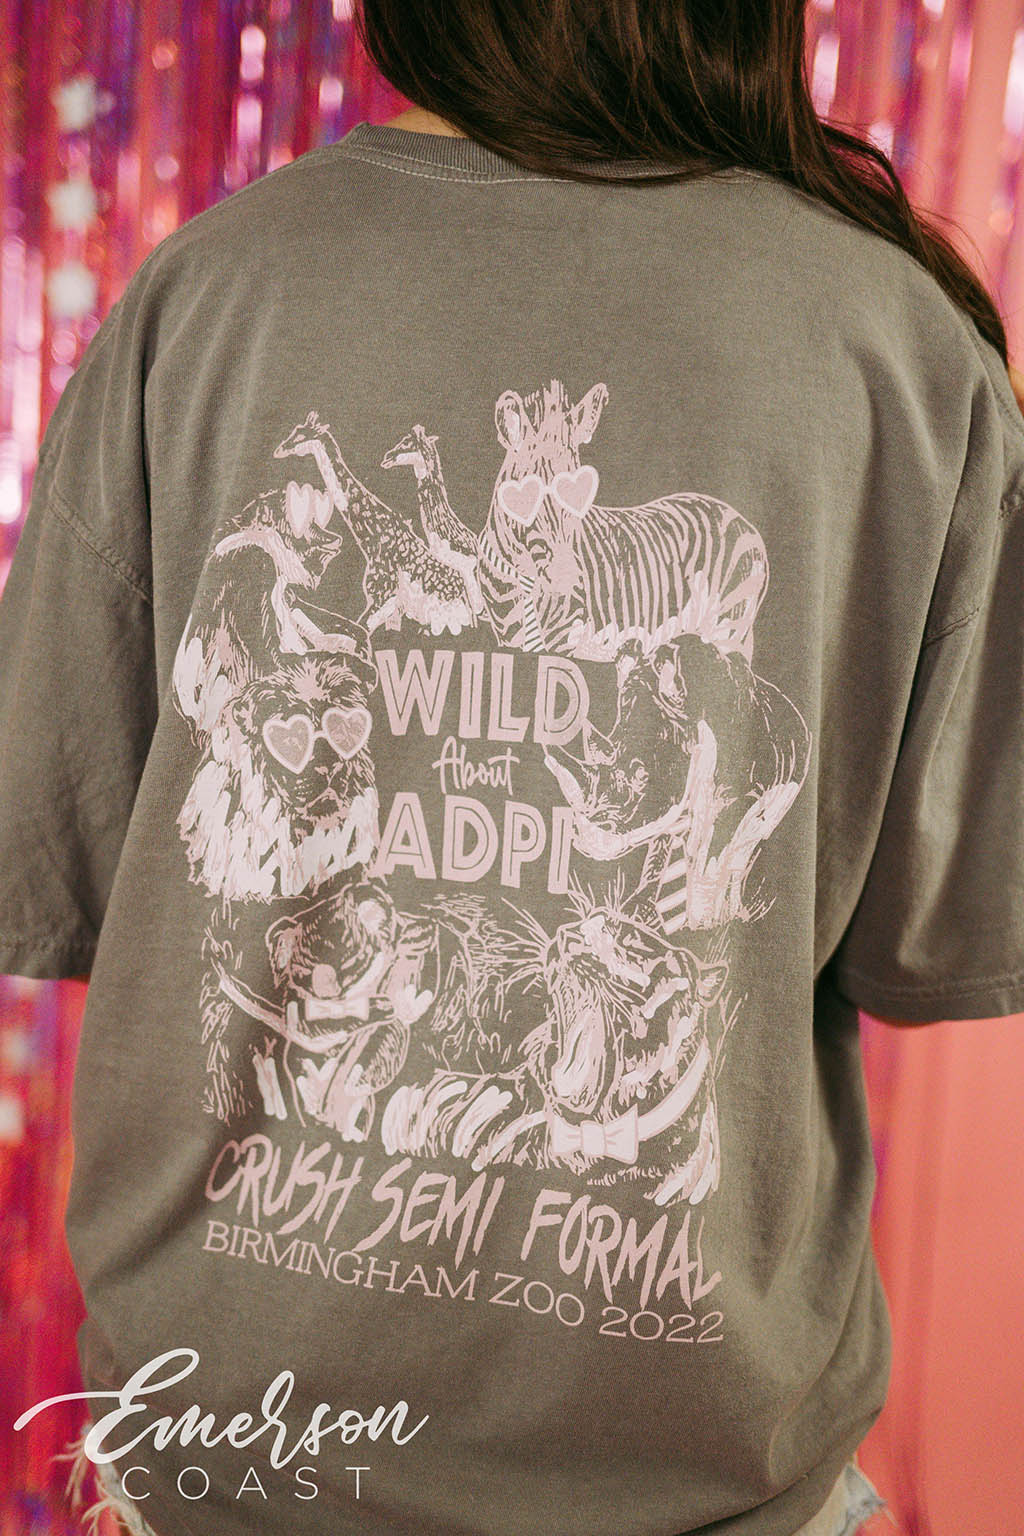 Girl wears green tshirt that reads &quot;Wild About ADPi&quot; and features an illustration of safari animals.